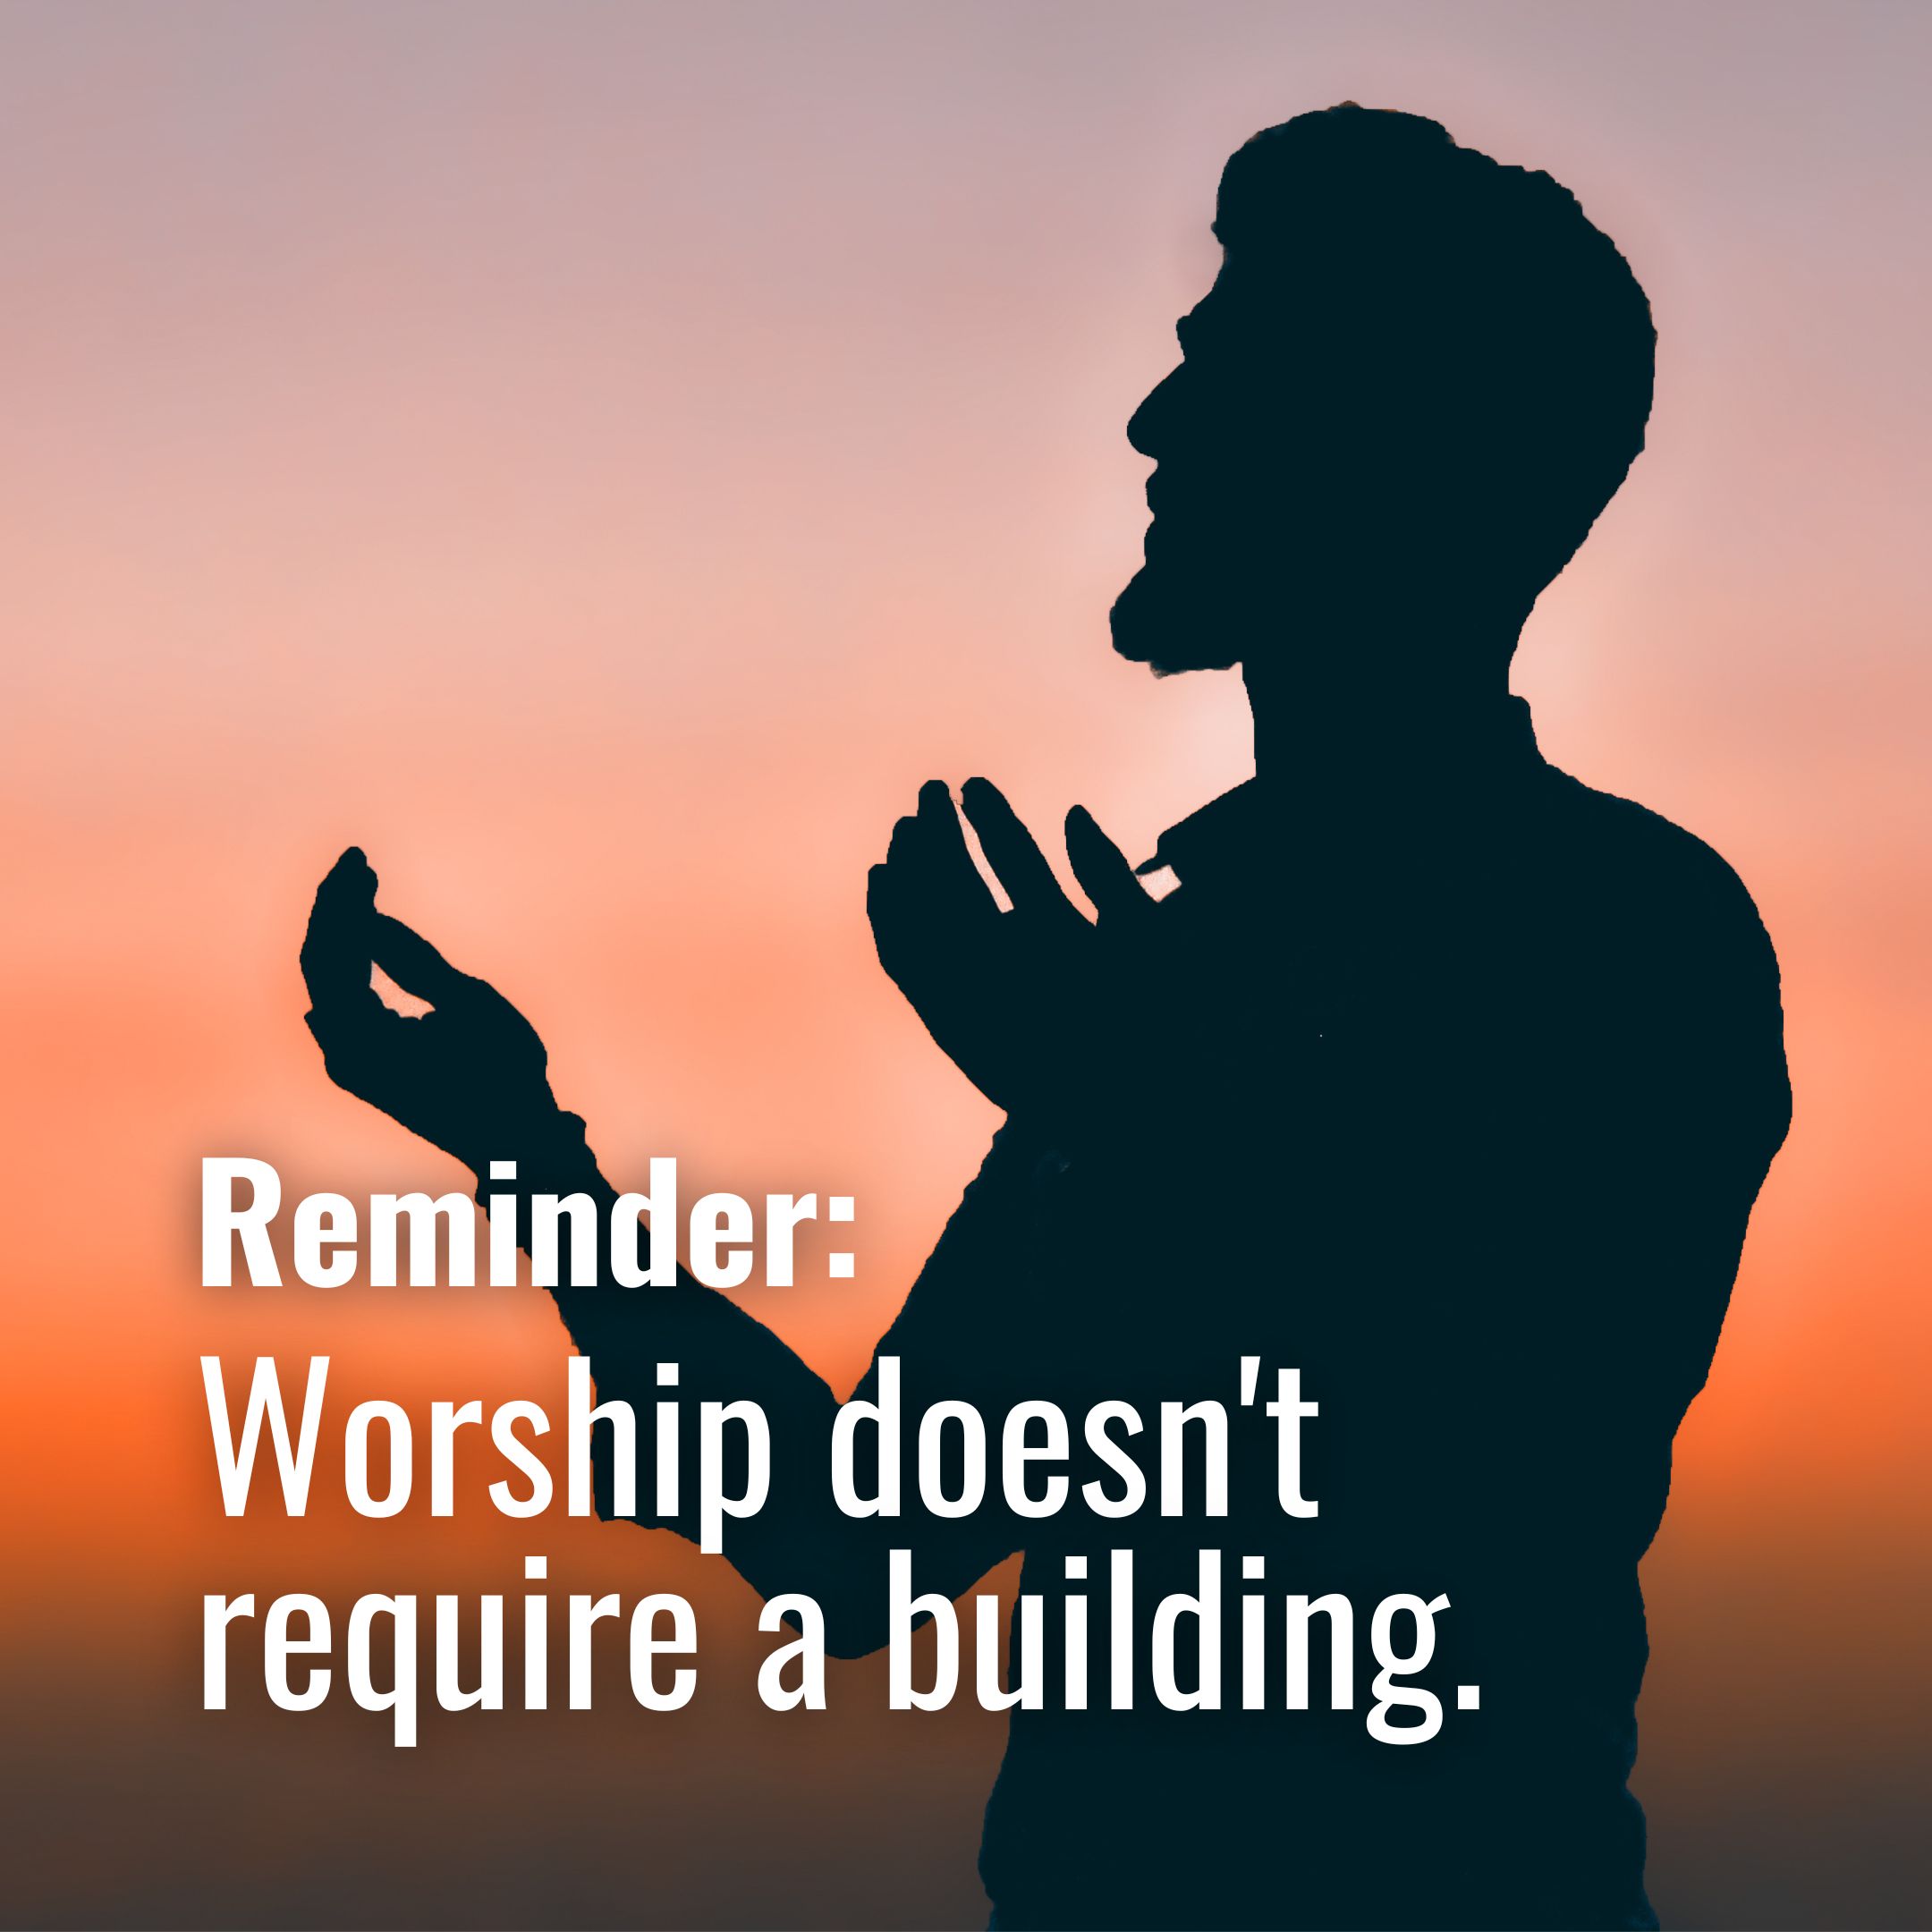 Worship doesn’t require a building.